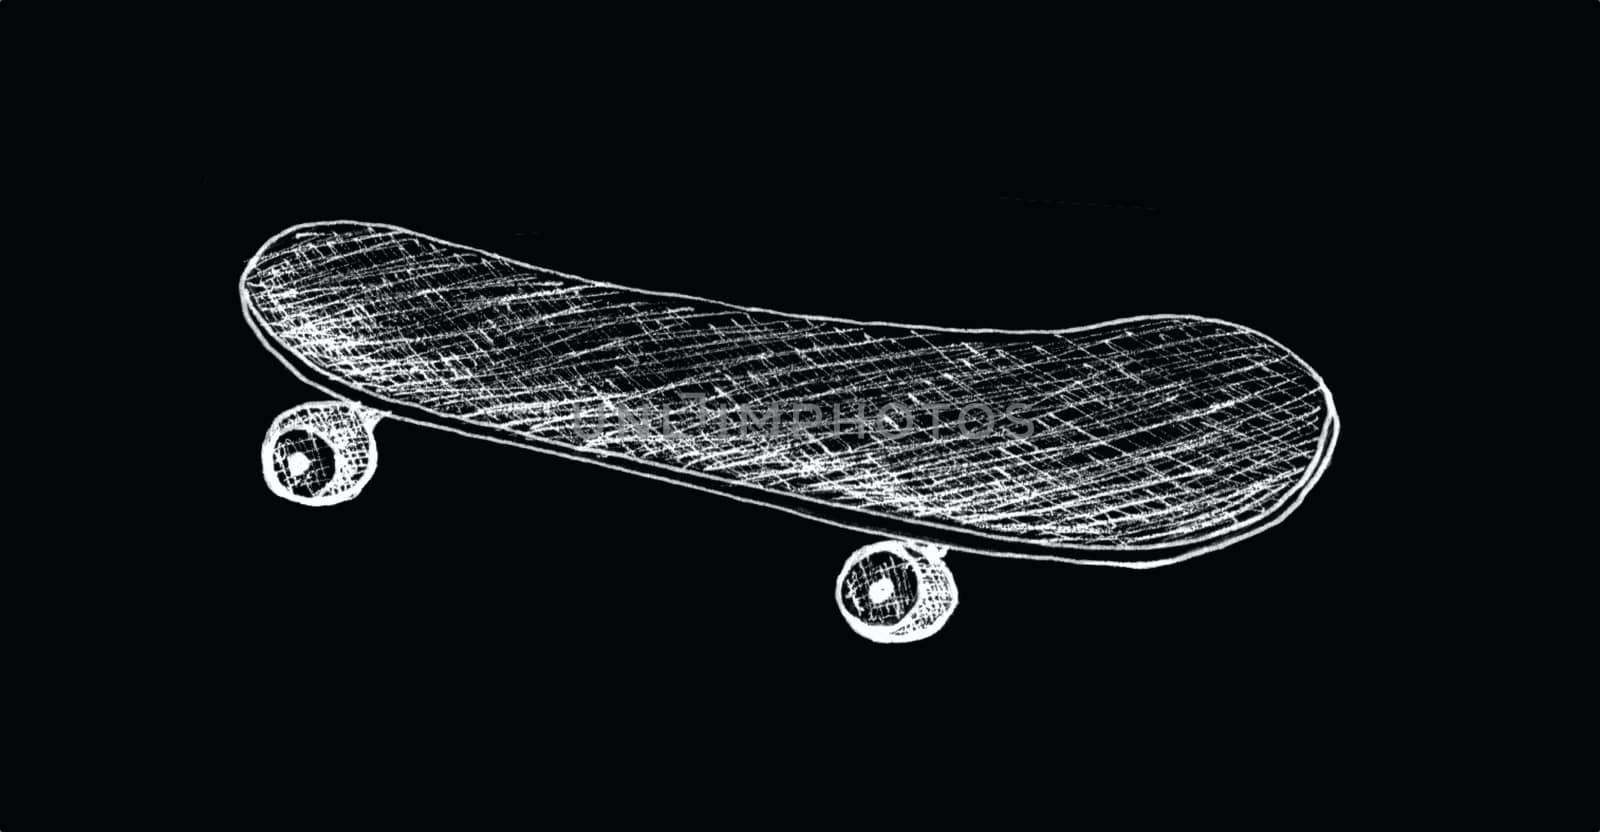 Skateboard ,longboard, pennyboard isolated on black background. Engraved style illustration for poster, decoration or print. Hand drawn sketch. Detailed vintage etching drawing. 